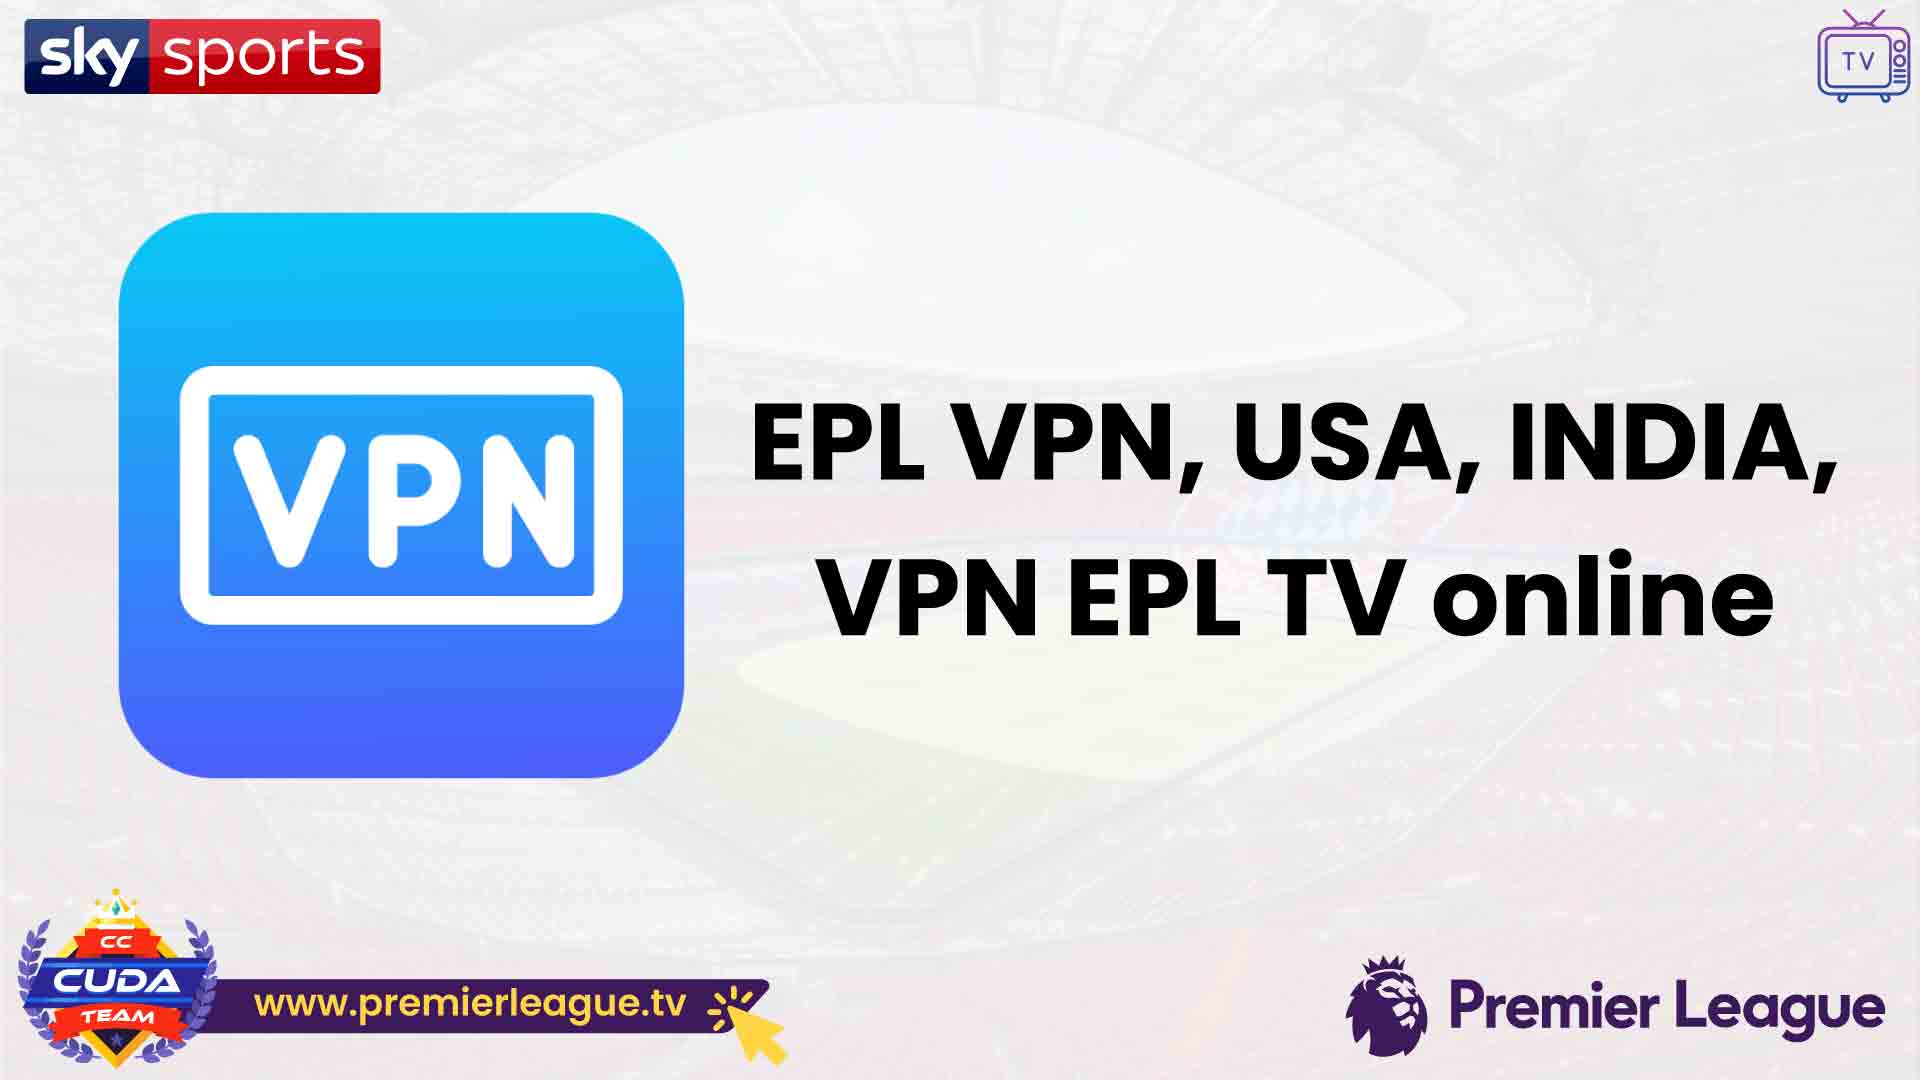 Watch Premier League live with a VPN, USA, INDIA, VPN EPL TV online